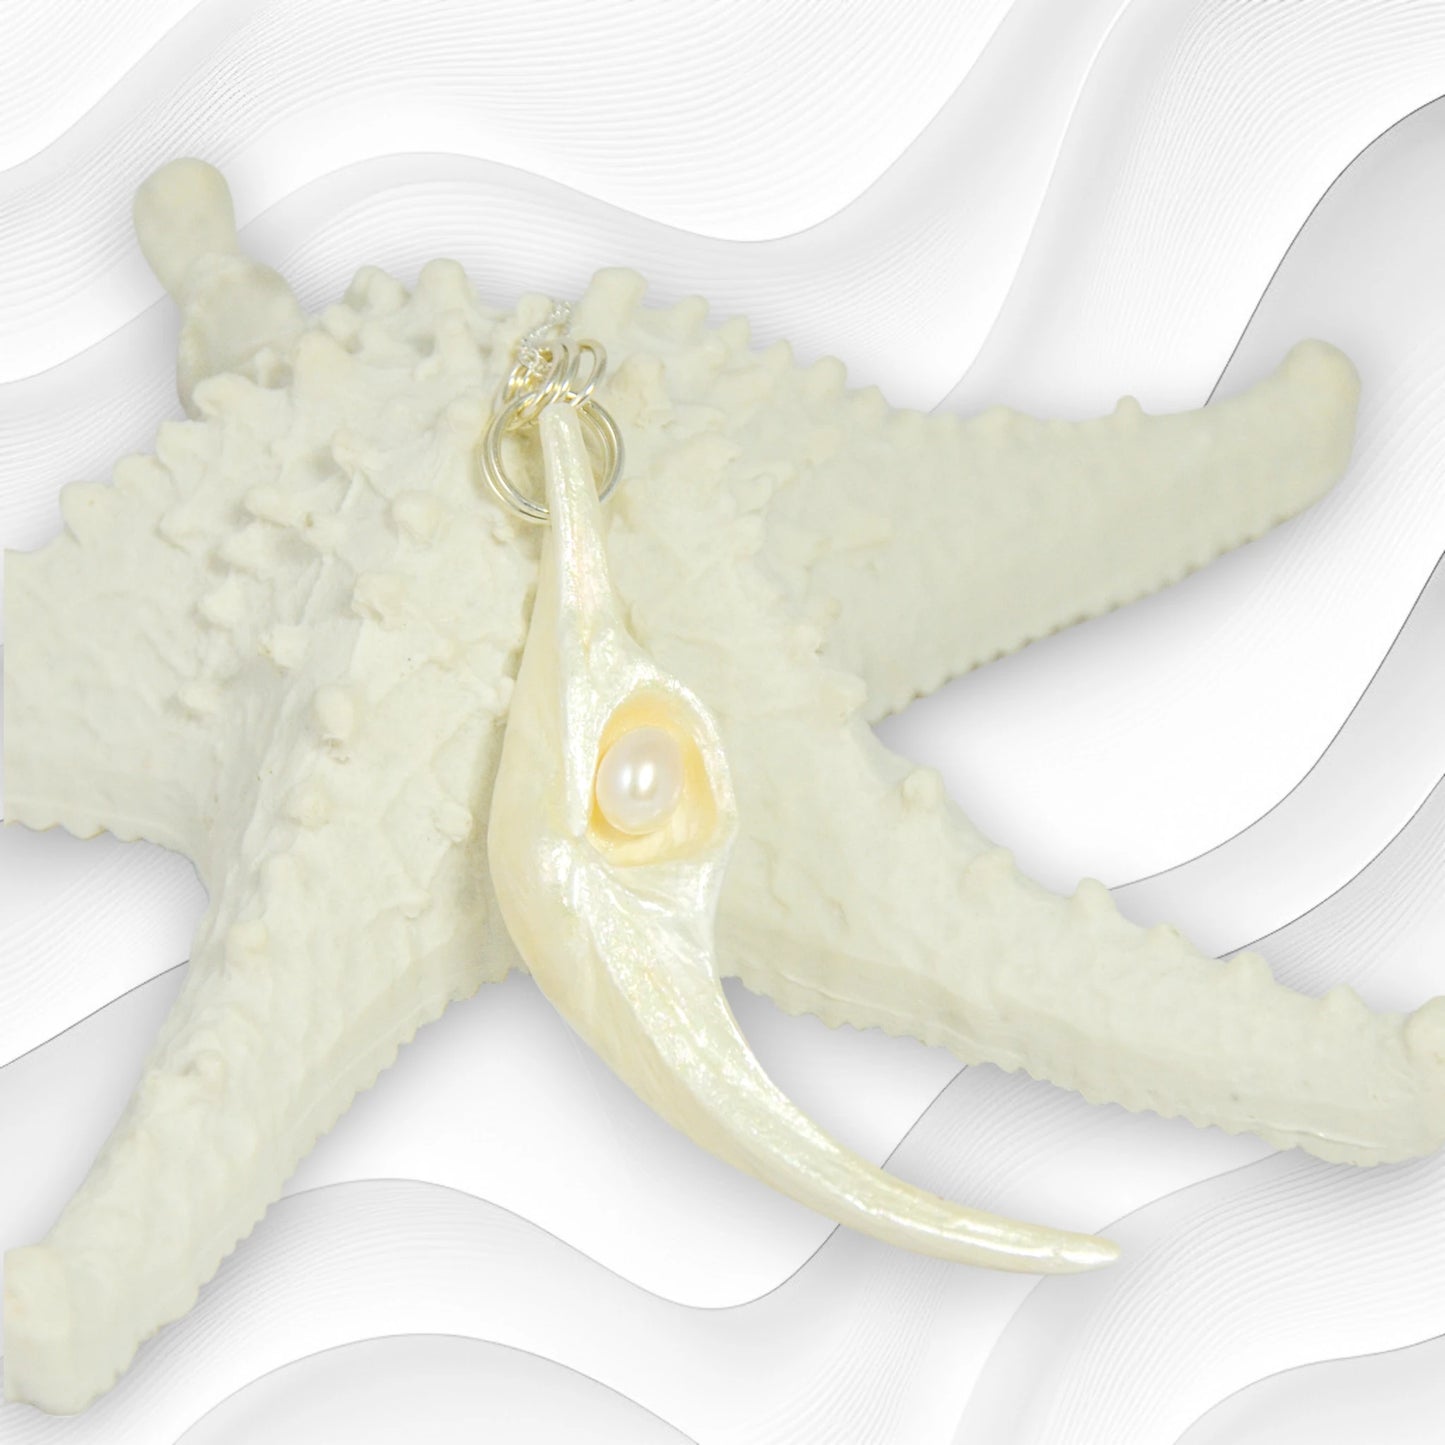 Jupiter is a natural seashell pendant with a real freshwater pearl. The pendant is shown resting on a starfish with a white background.